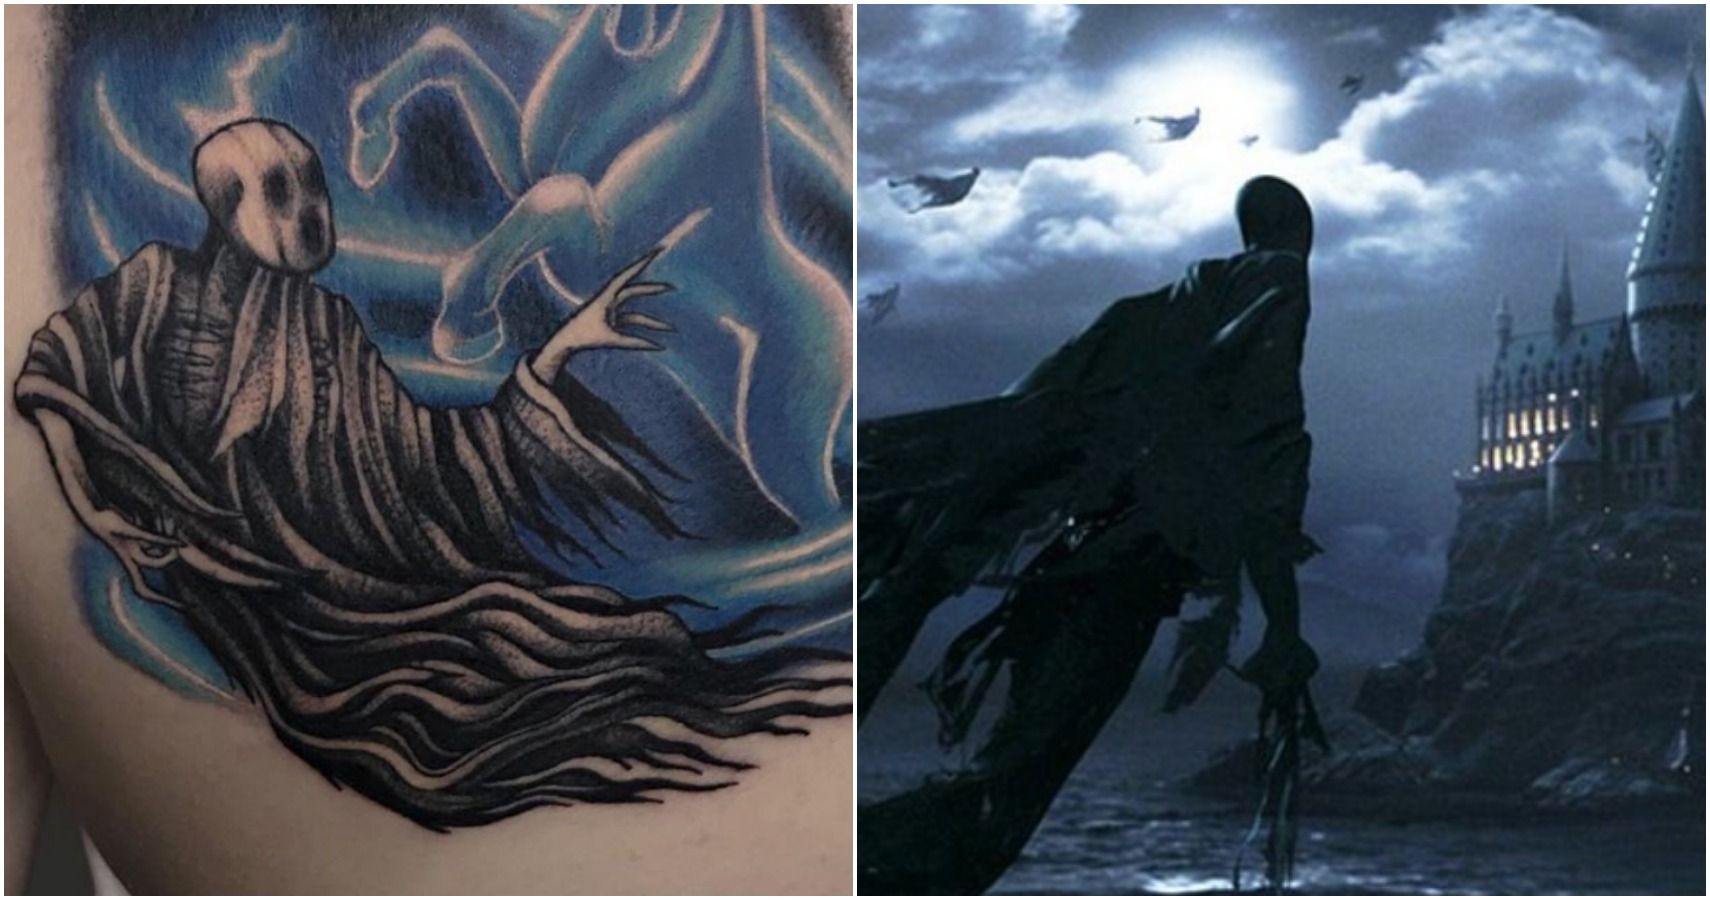 Dementor cover up tattoo done by Gabe Richmond at Temple Tattoo in  Gallipolis OH  rharrypotter